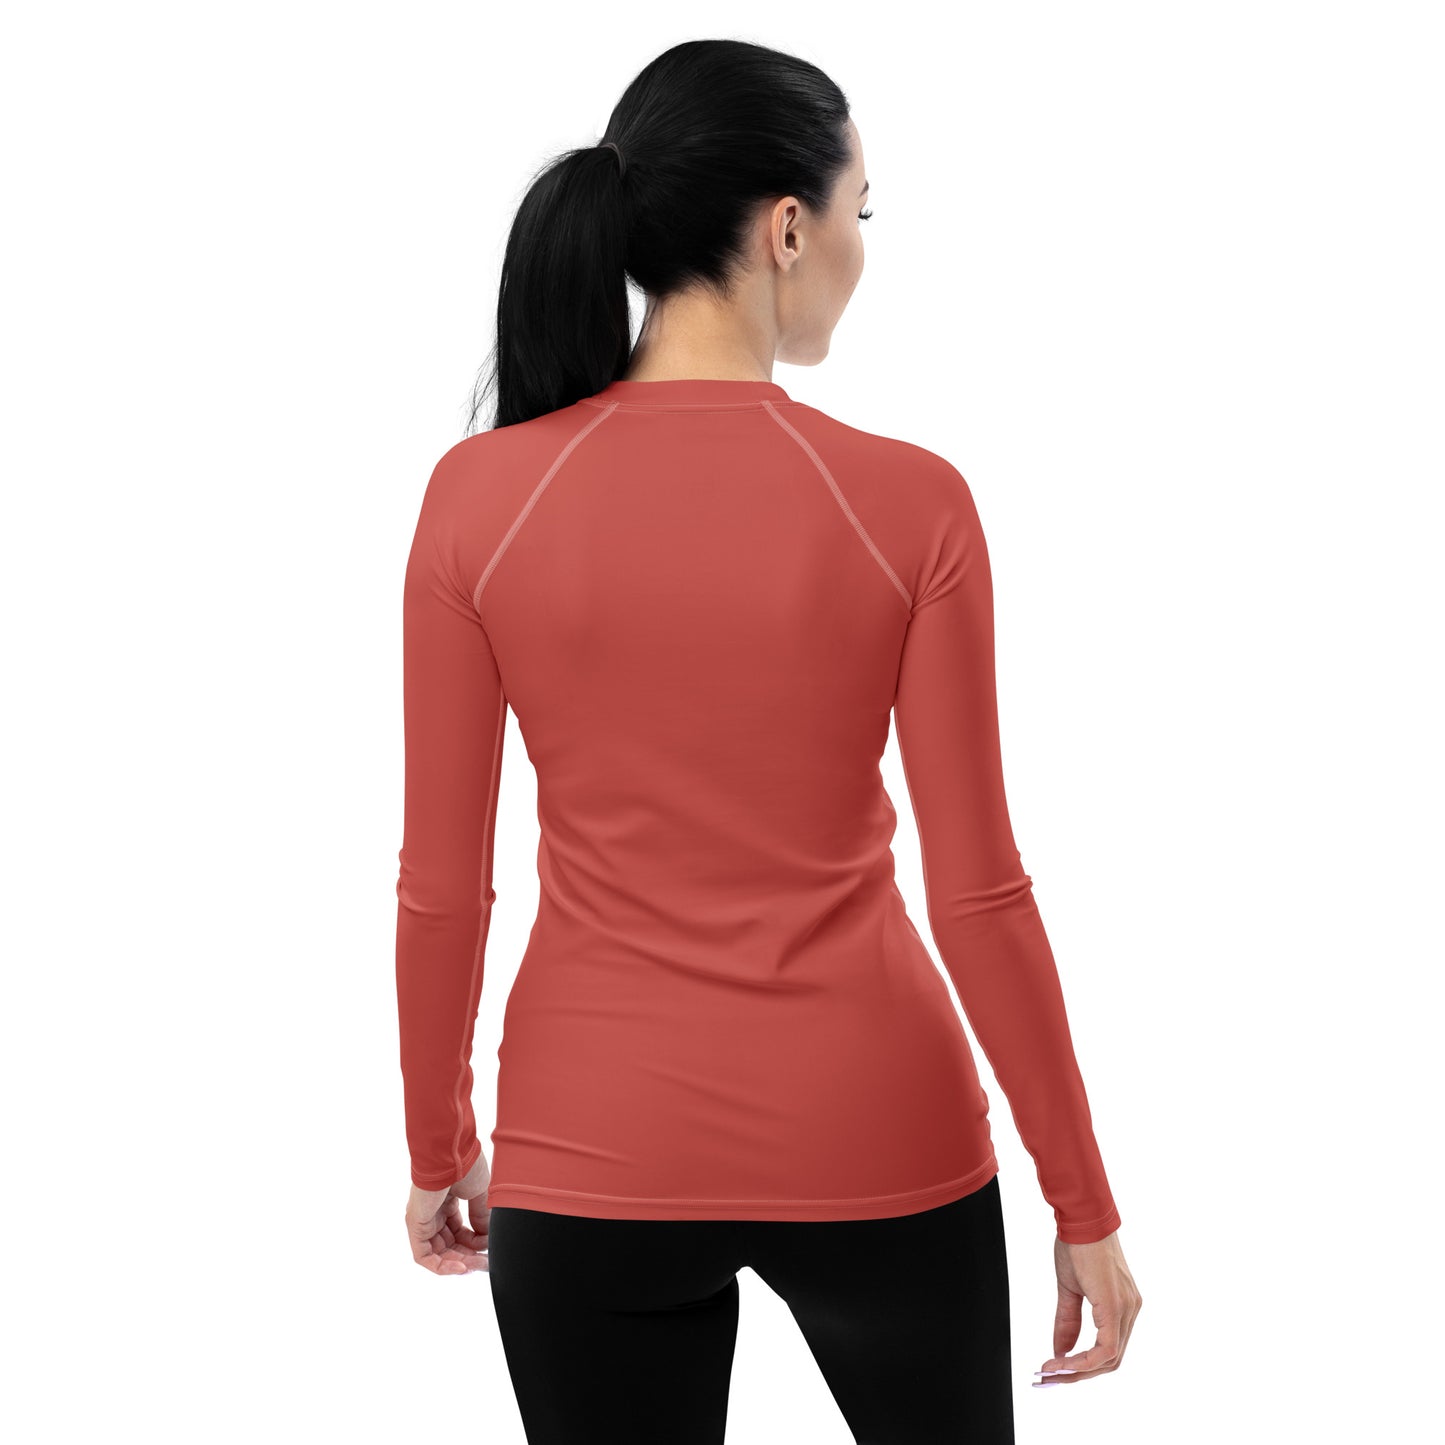 Heart - Inspired By Taylor Swift - Sustainably Made Women's Rash Guard